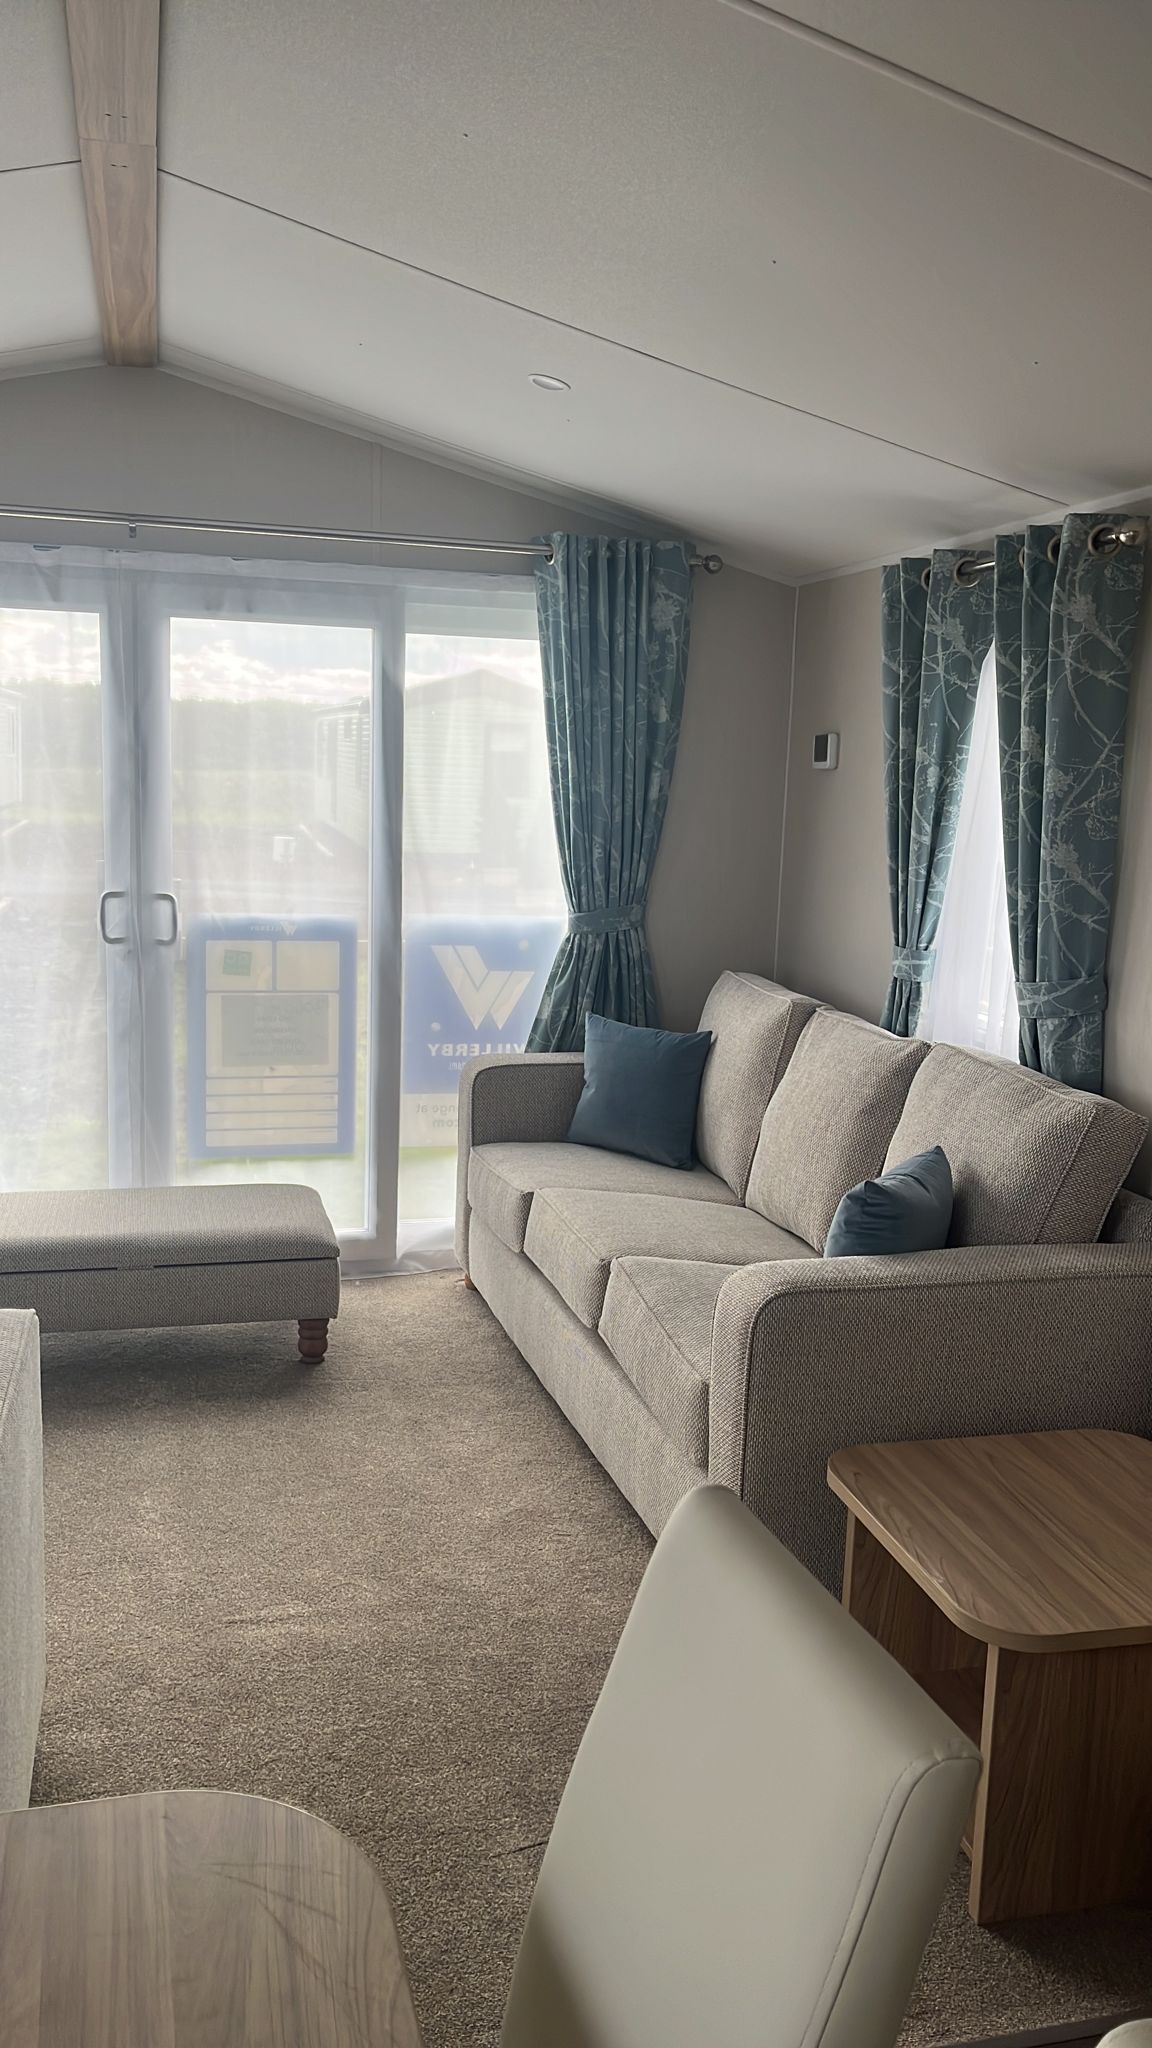 Image 3 of new-willerby-malton-29995